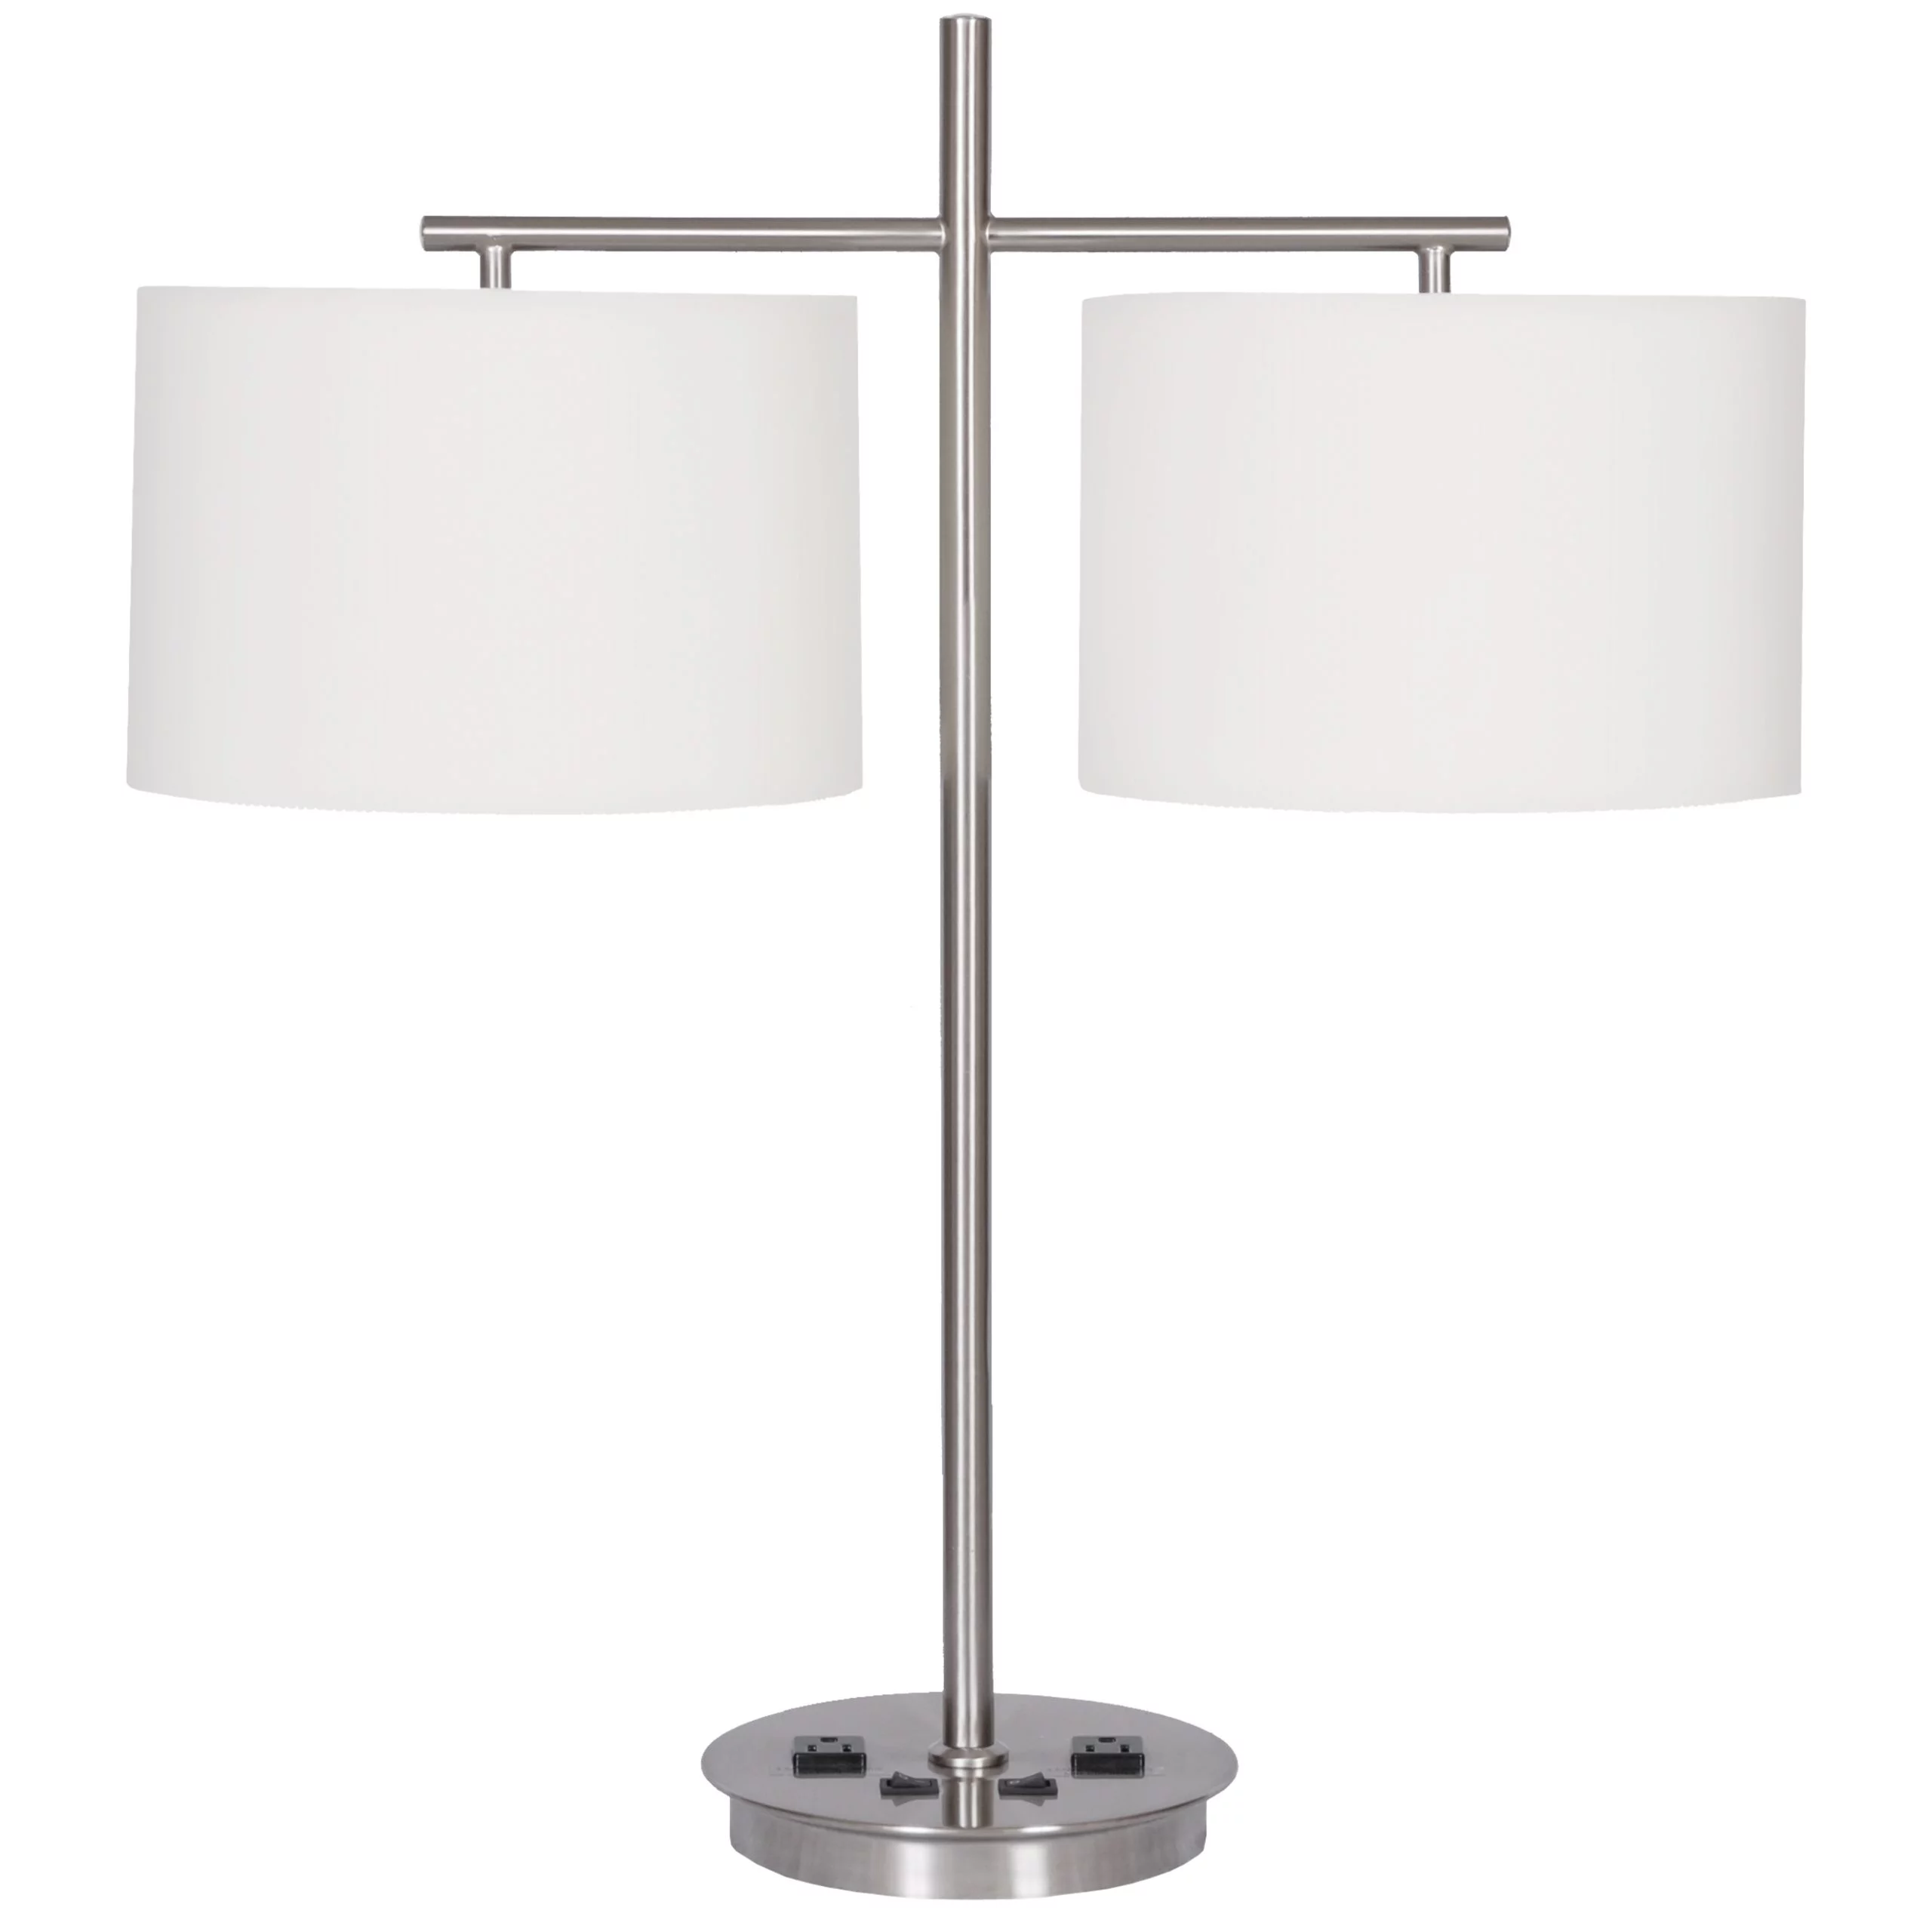 Twin Table Lamp with 2 Outlets